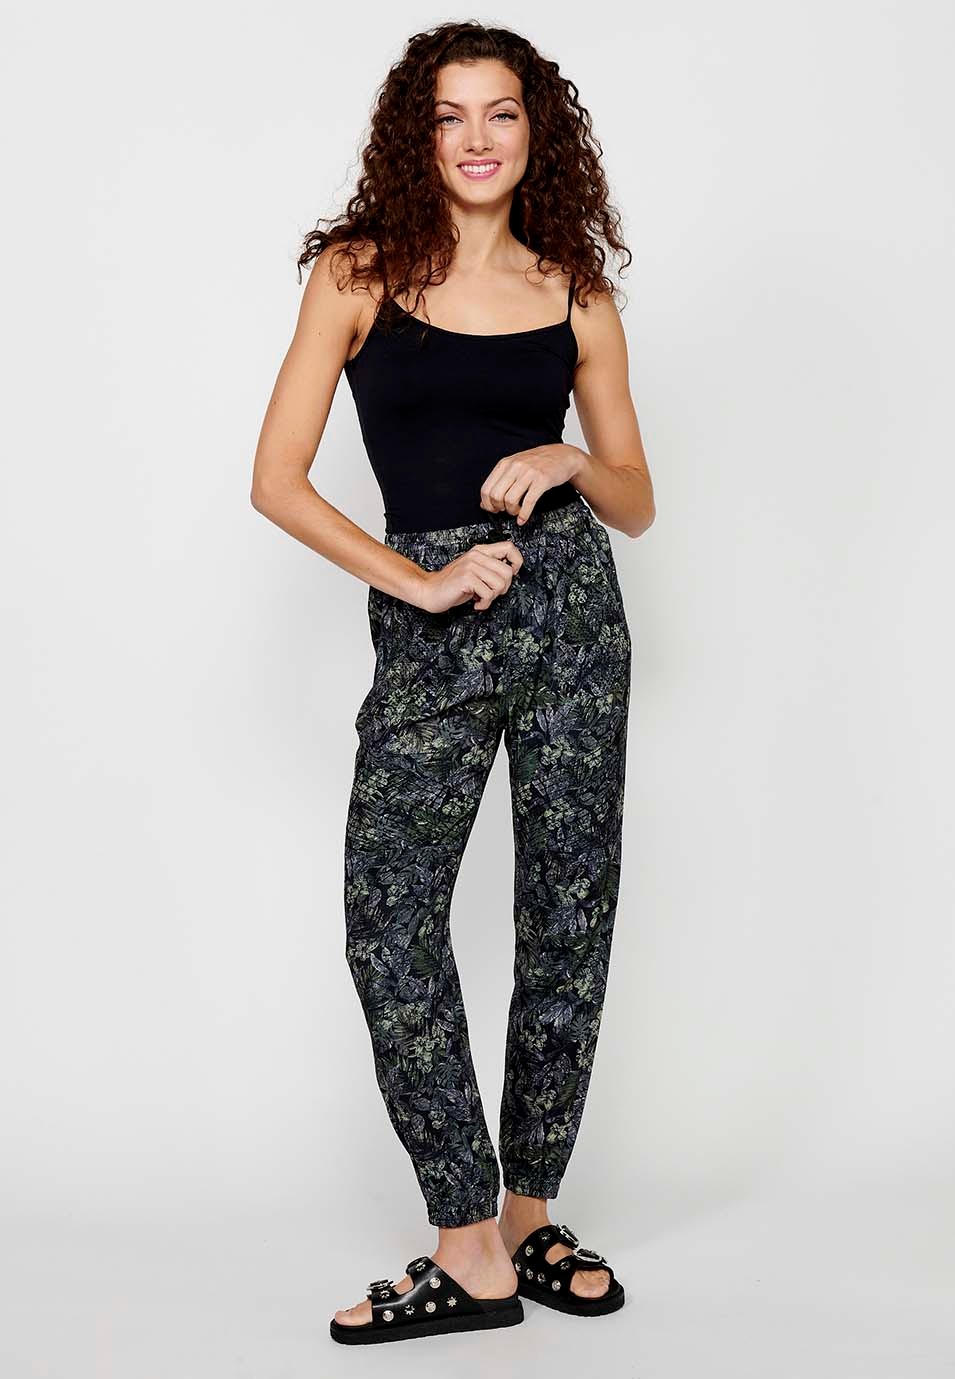 Long jogging pants fitted at the ankles with elasticated waistband with drawstring and Khaki floral print for Women